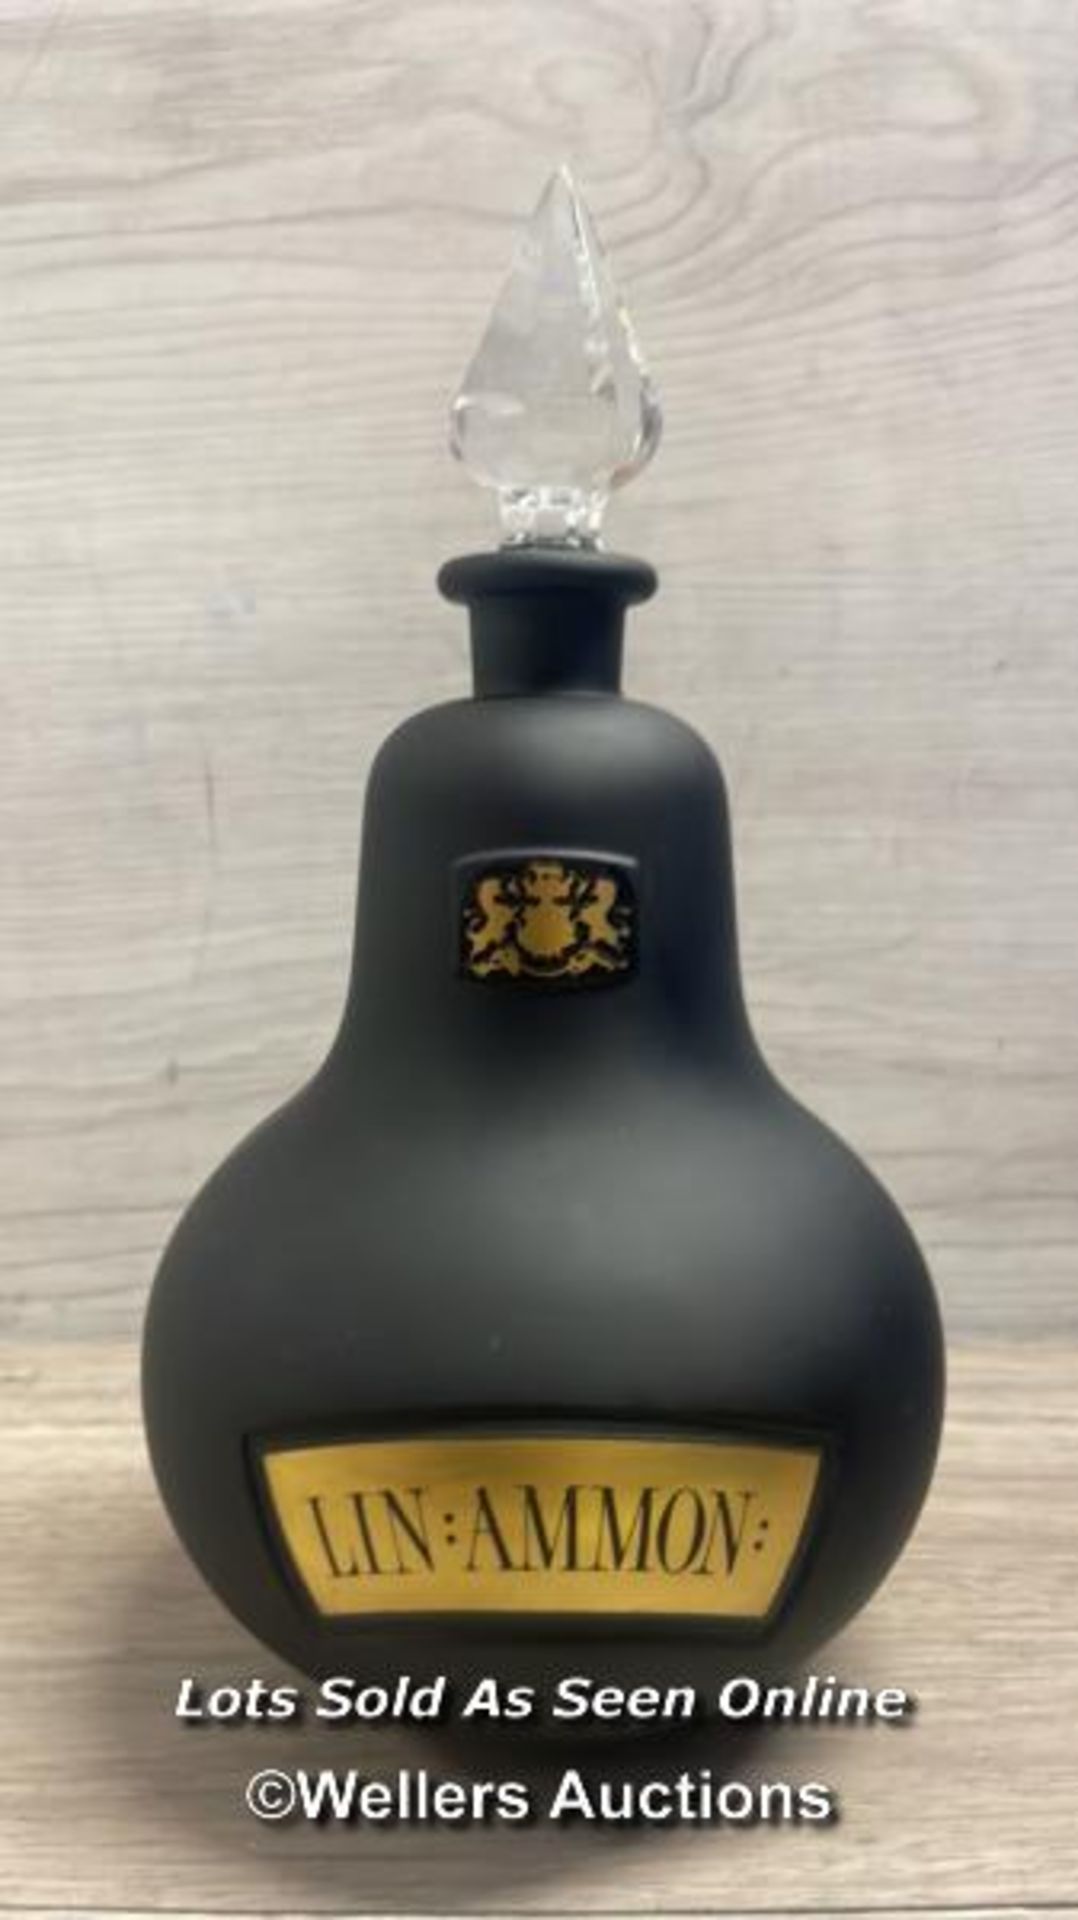 A RARE ROYAL PHARMACEUTICAL SOCIETY APOTHECARY BOTTLE, C1970S / 80'S, IN BLACK FROSTED GLASS WITH